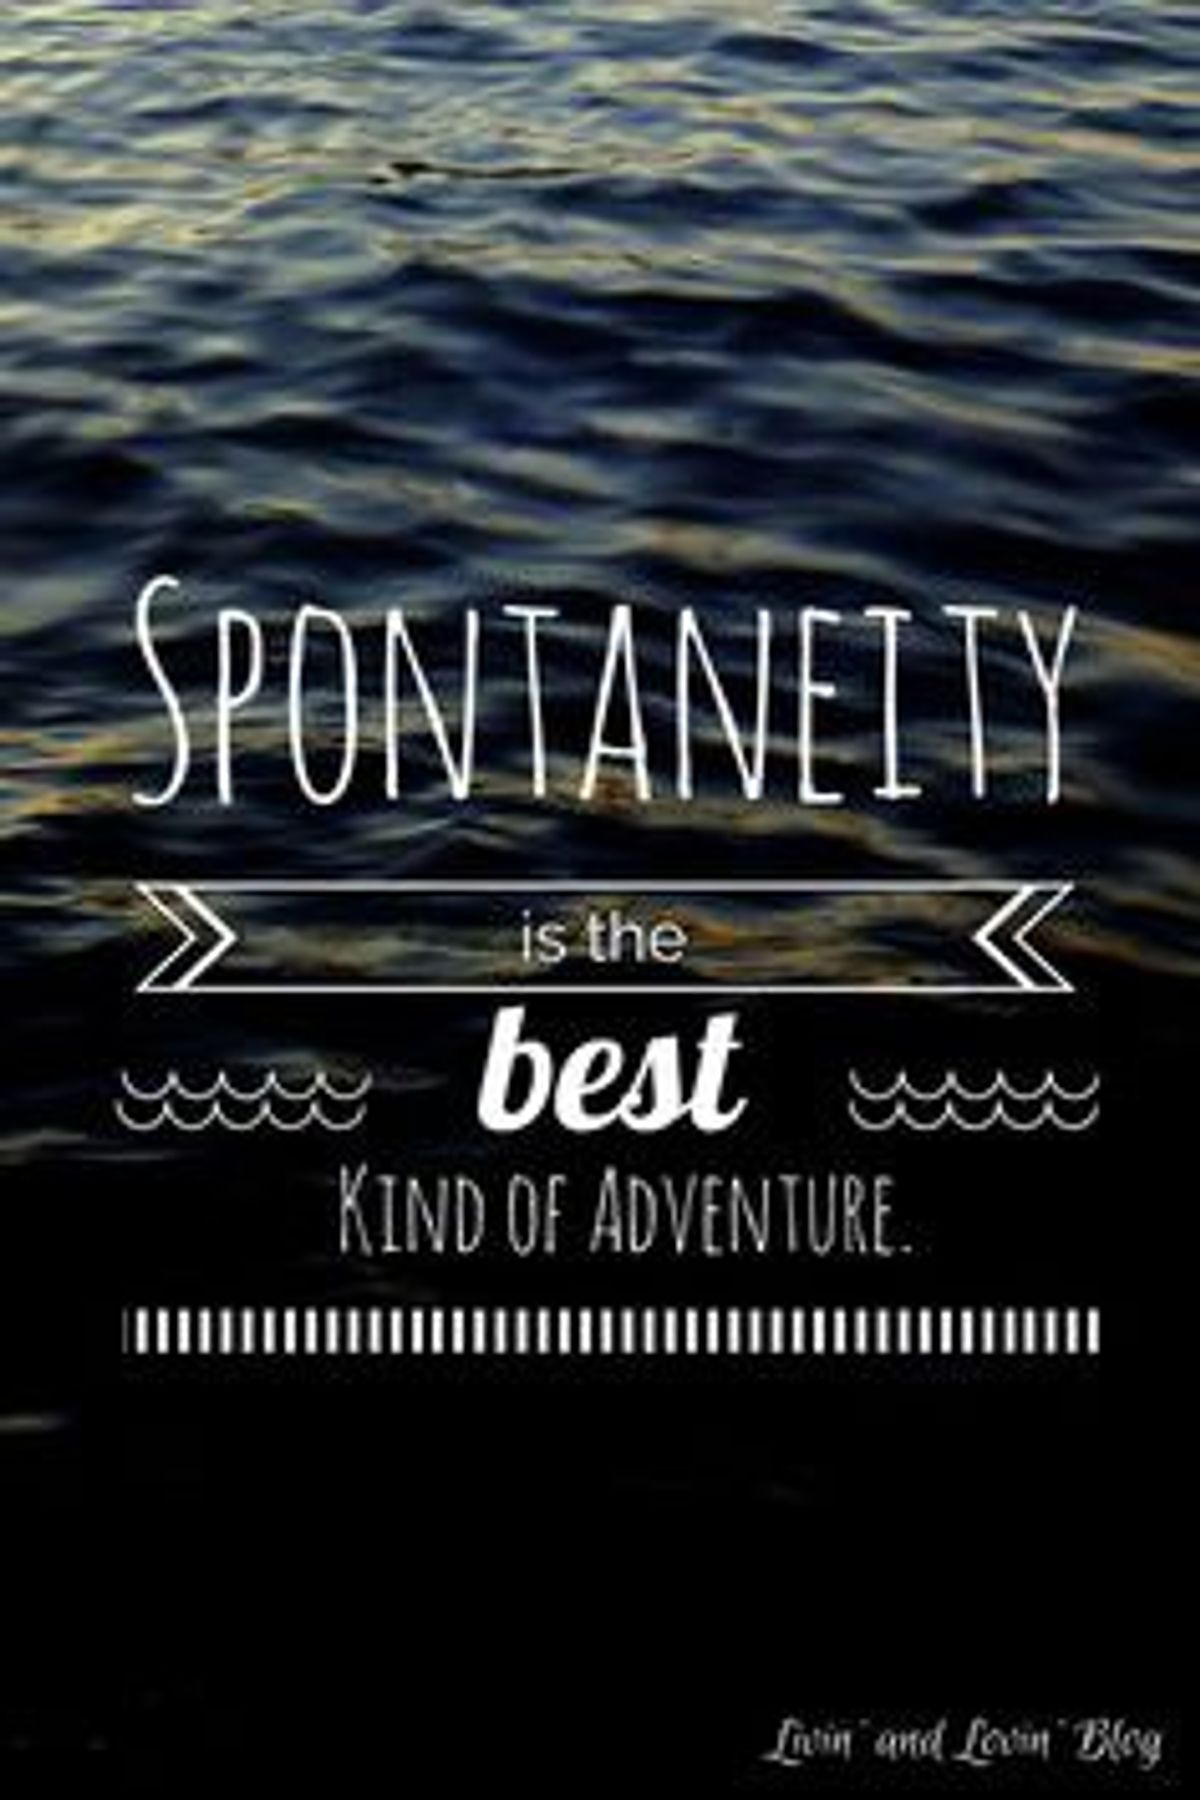 The Truth About Spontaneity